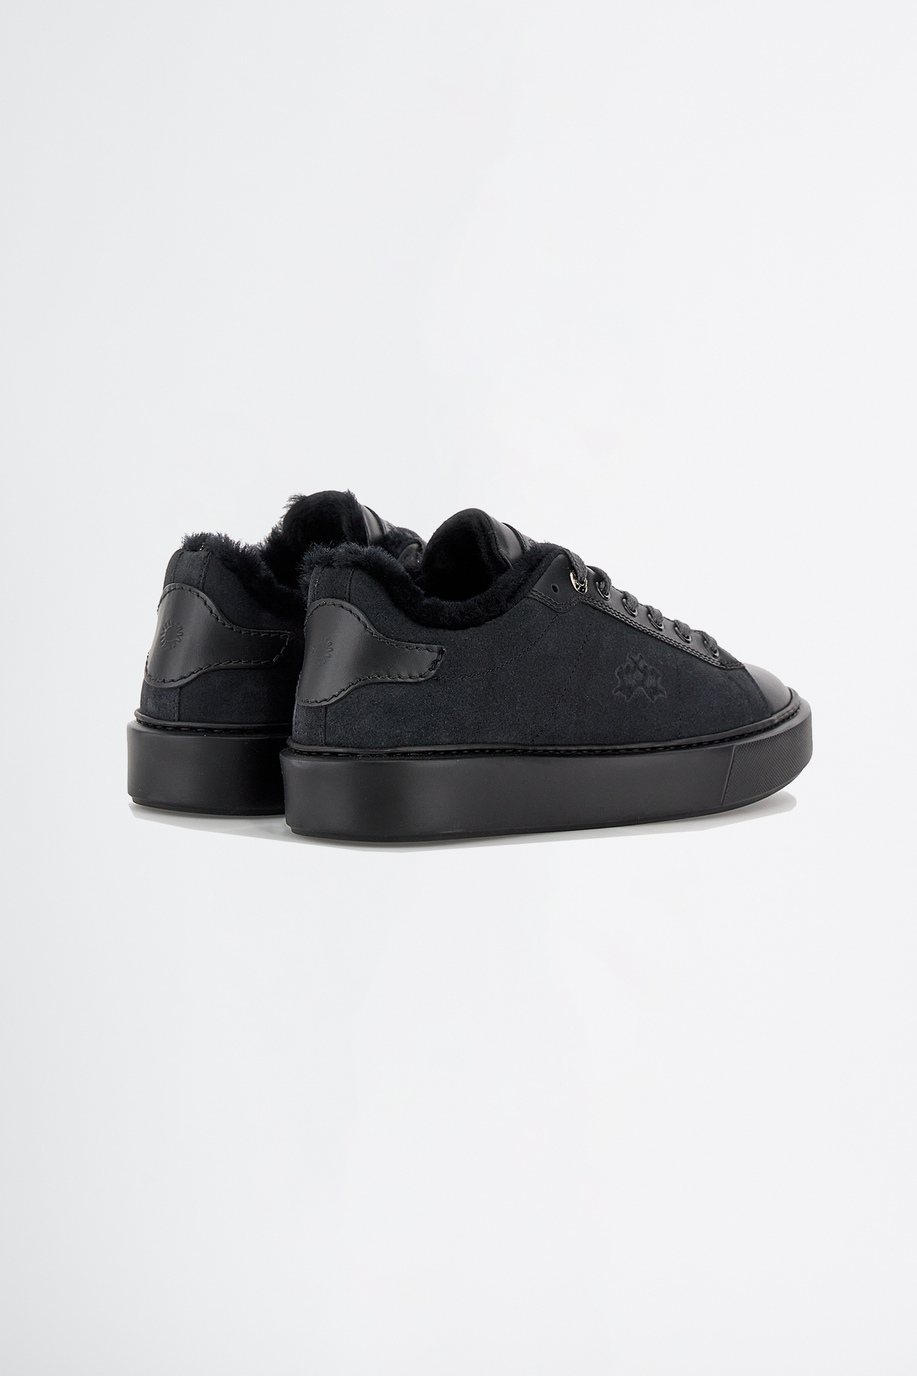 Women's trainers with inner lining - Footwear | La Martina - Official Online Shop